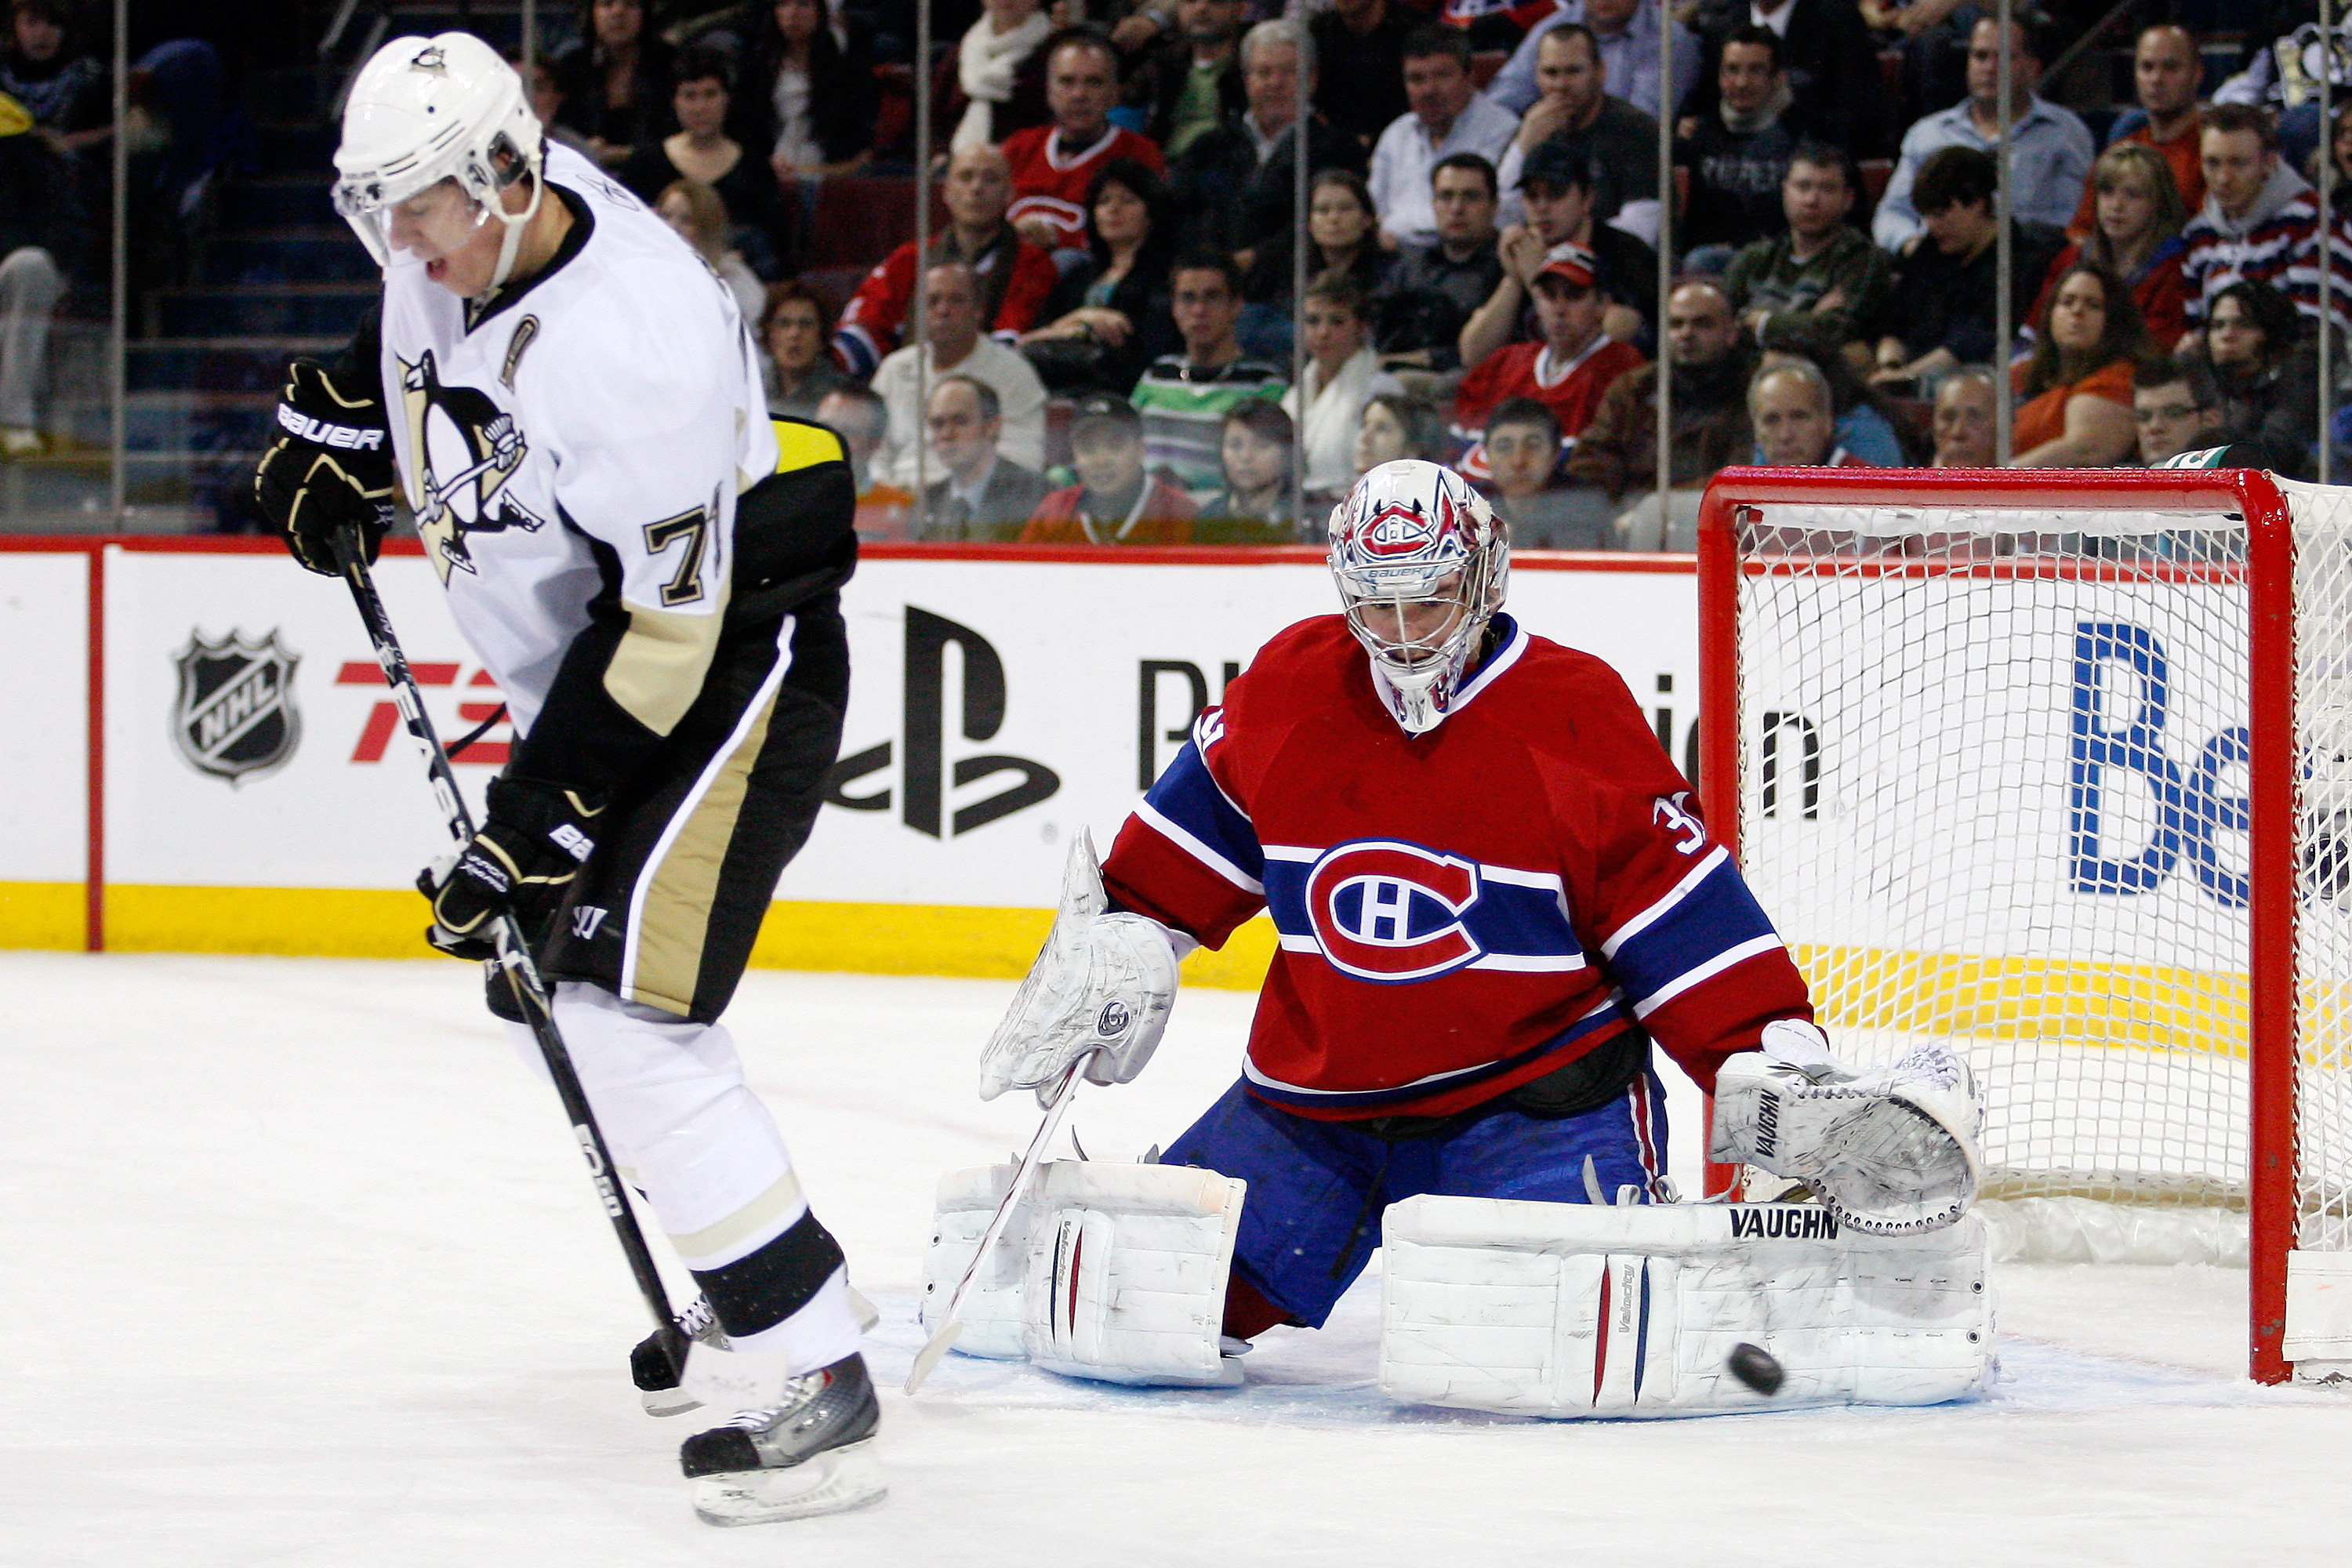 MONTREAL, CANADA - JANUARY 12:  Carey Price #31 of the Montreal Canadiens gets down to stop the puck deflected by Evgeni Malkin #71 of the Pittsburgh Penguins during the NHL game at the Bell Centre on January 12, 2011 in Montreal, Quebec, Canada.  (Photo